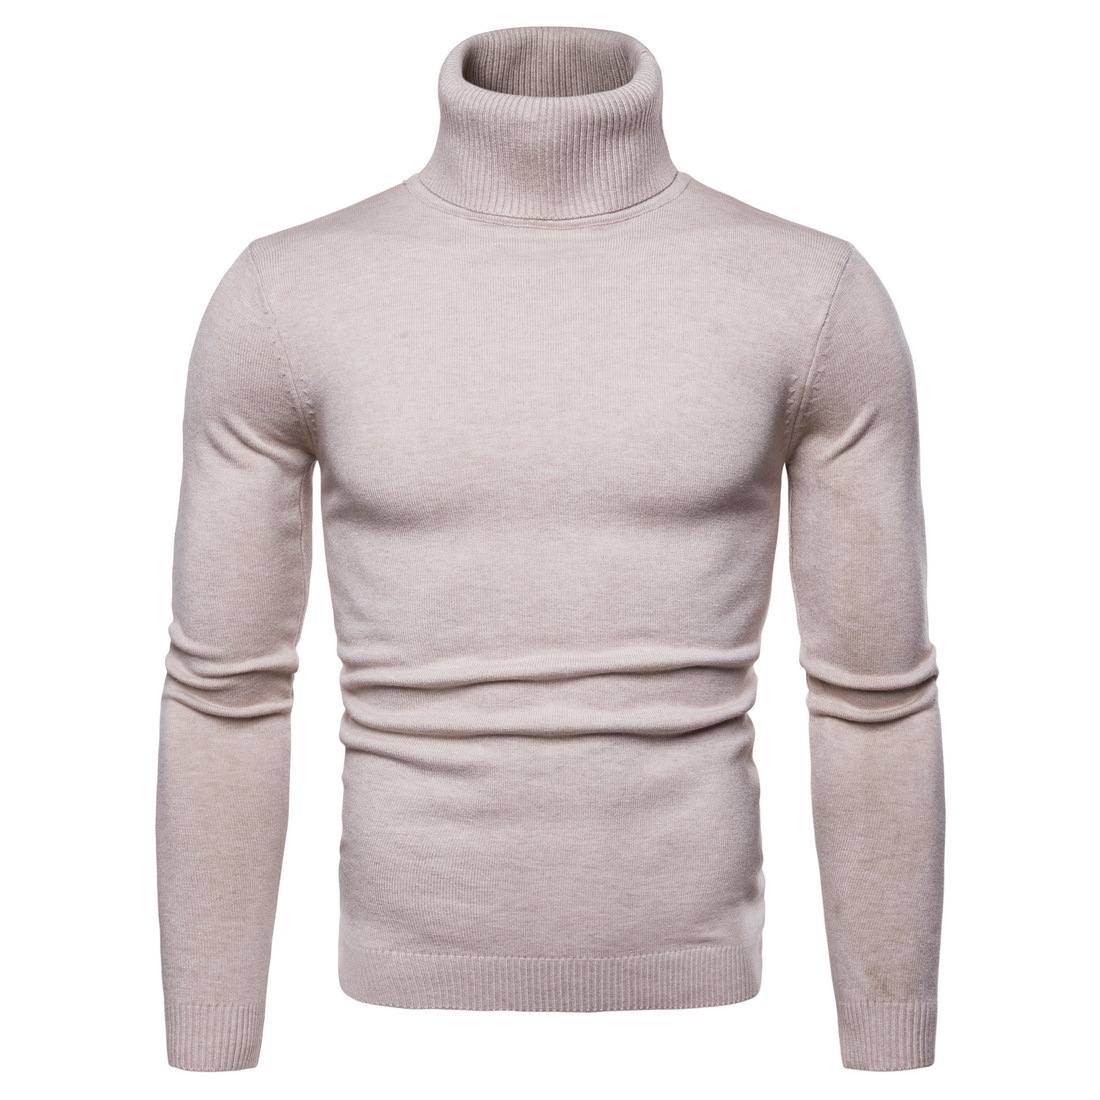 Men Knitted Sweater Autumn Winter Turtleneck Long Sleeve Casual Slim Pullover Tops beige